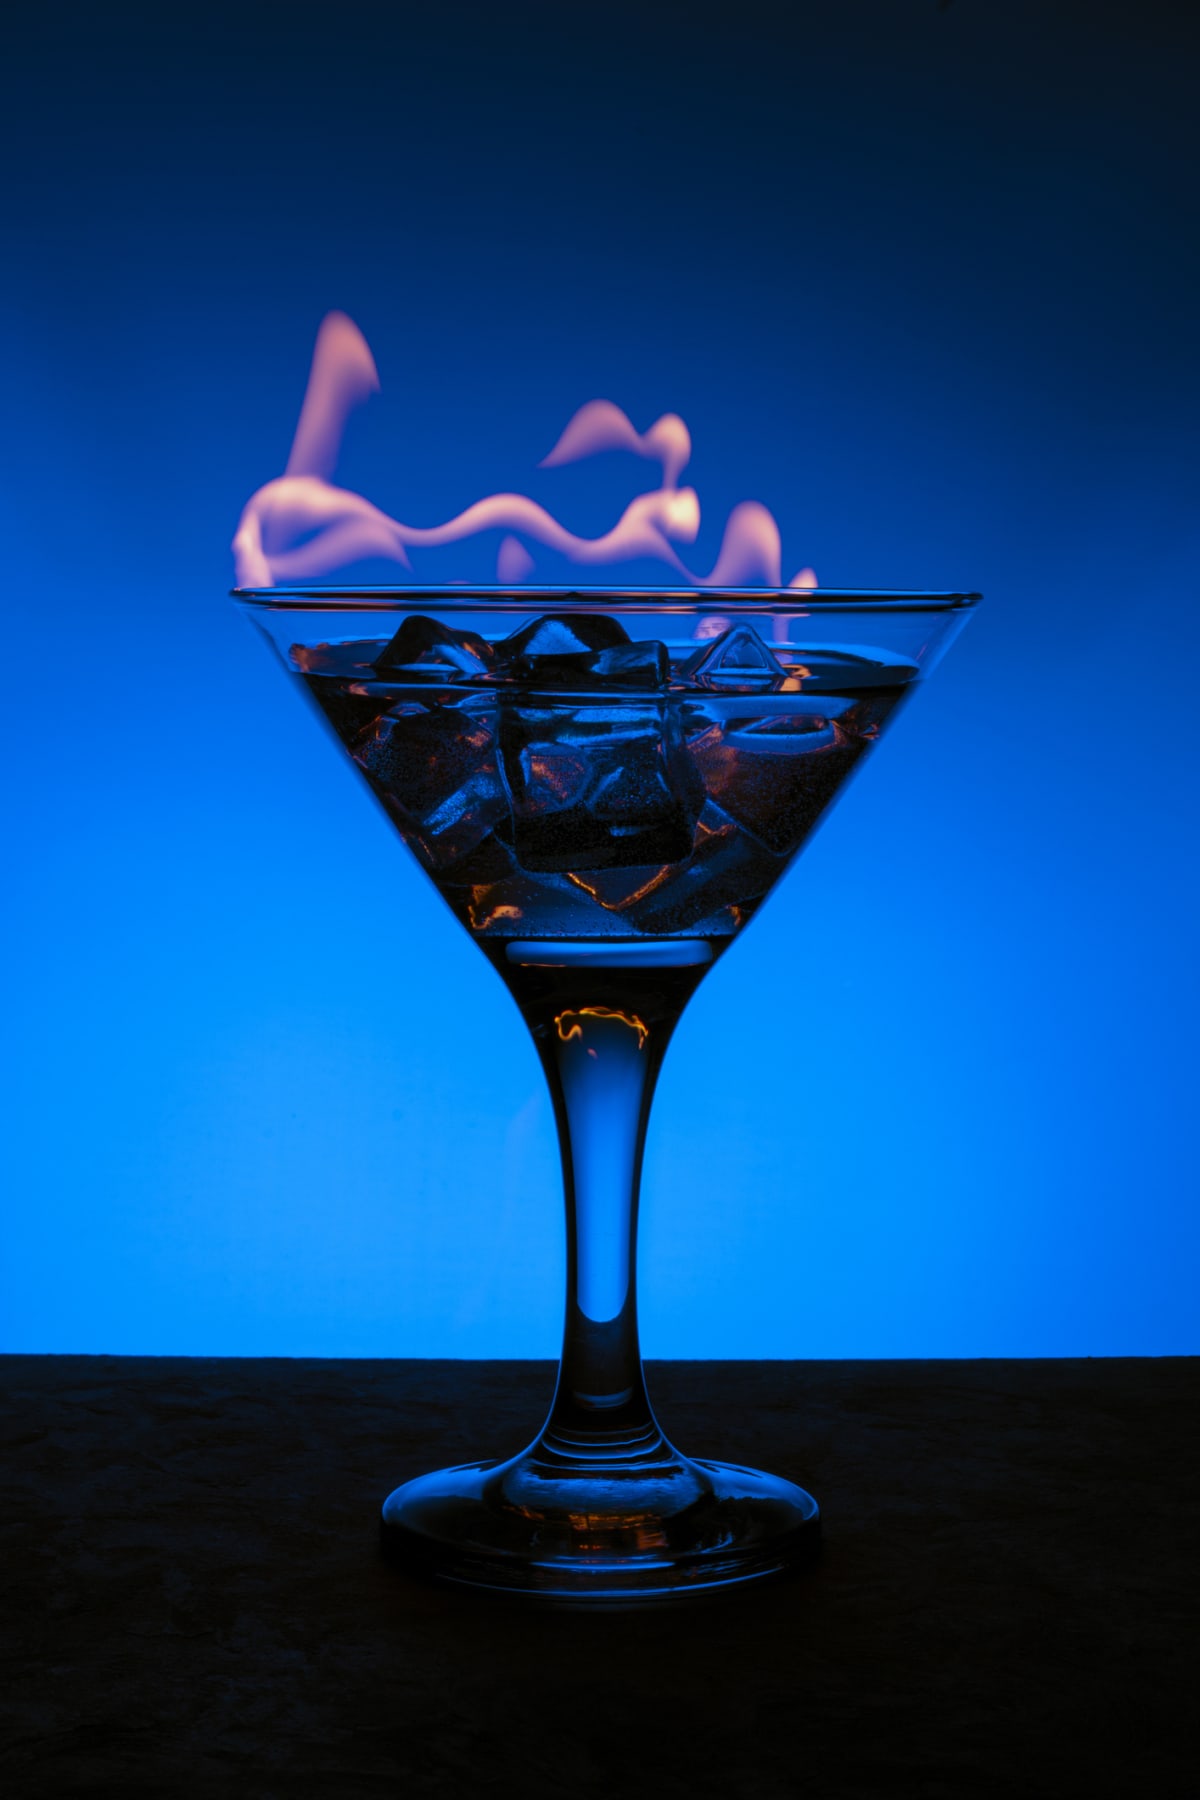 Burning alcoholic drink with ice cubes, on a blue gradient background, vertical frame. Burning cocktail on table in a bar. Blue alcoholic beverage and fire.